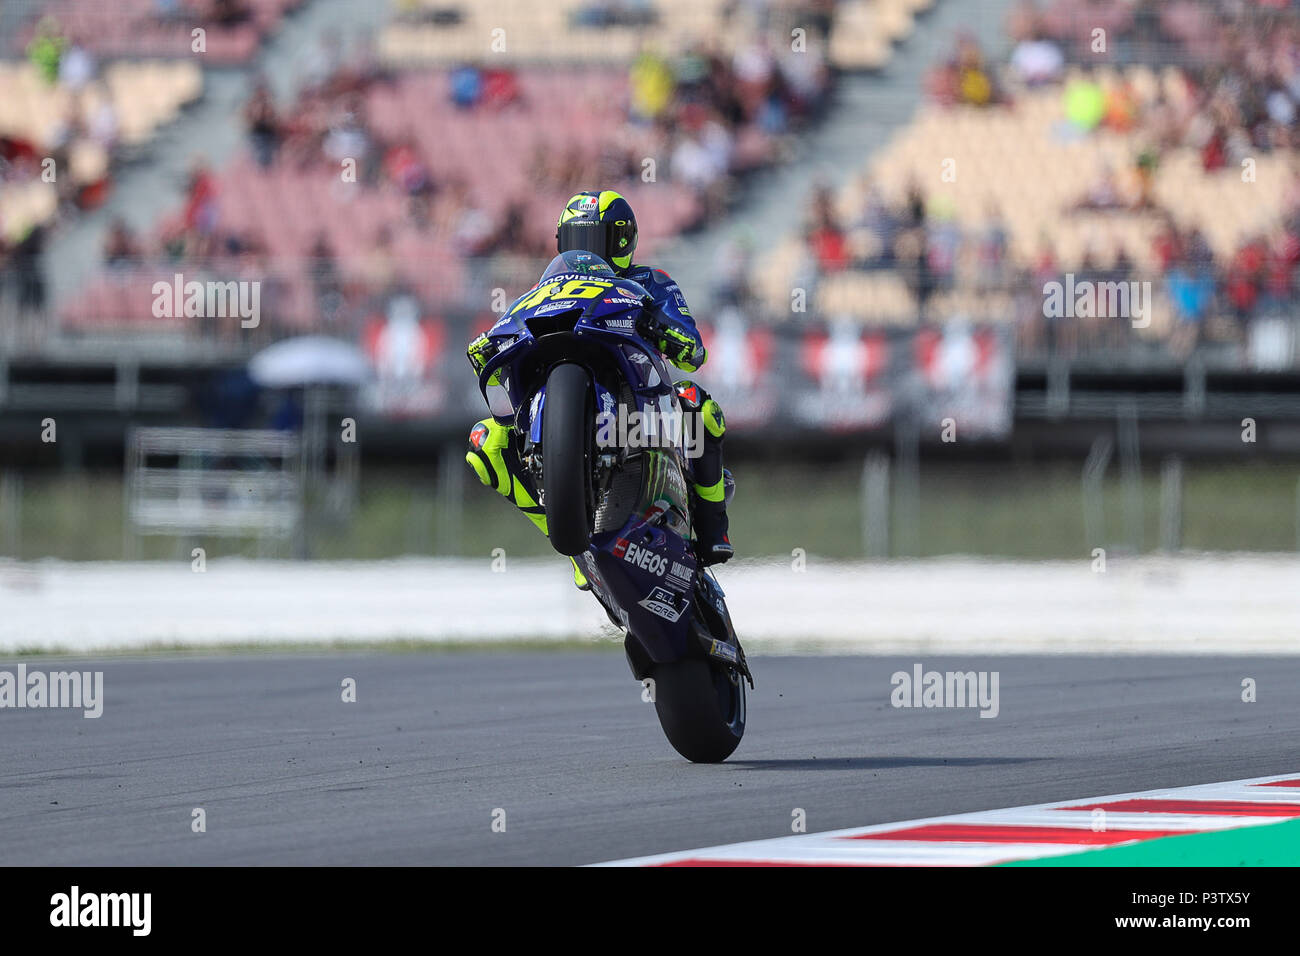 June 16, 2018 - Montmelo, Catalunya, Spain - Valentino ROSSI of Italy and Movistar Yamaha MotoGp competes during Gran Premi Monster Energy de Catalunya (Grand Prix of Catalunya), MotoGP free practrice, on June 16, 2018 at the Catalunya racetrack in Montmelo, near Barcelona, Spain (Credit Image: © Manuel Blondeau via ZUMA Wire) Stock Photo